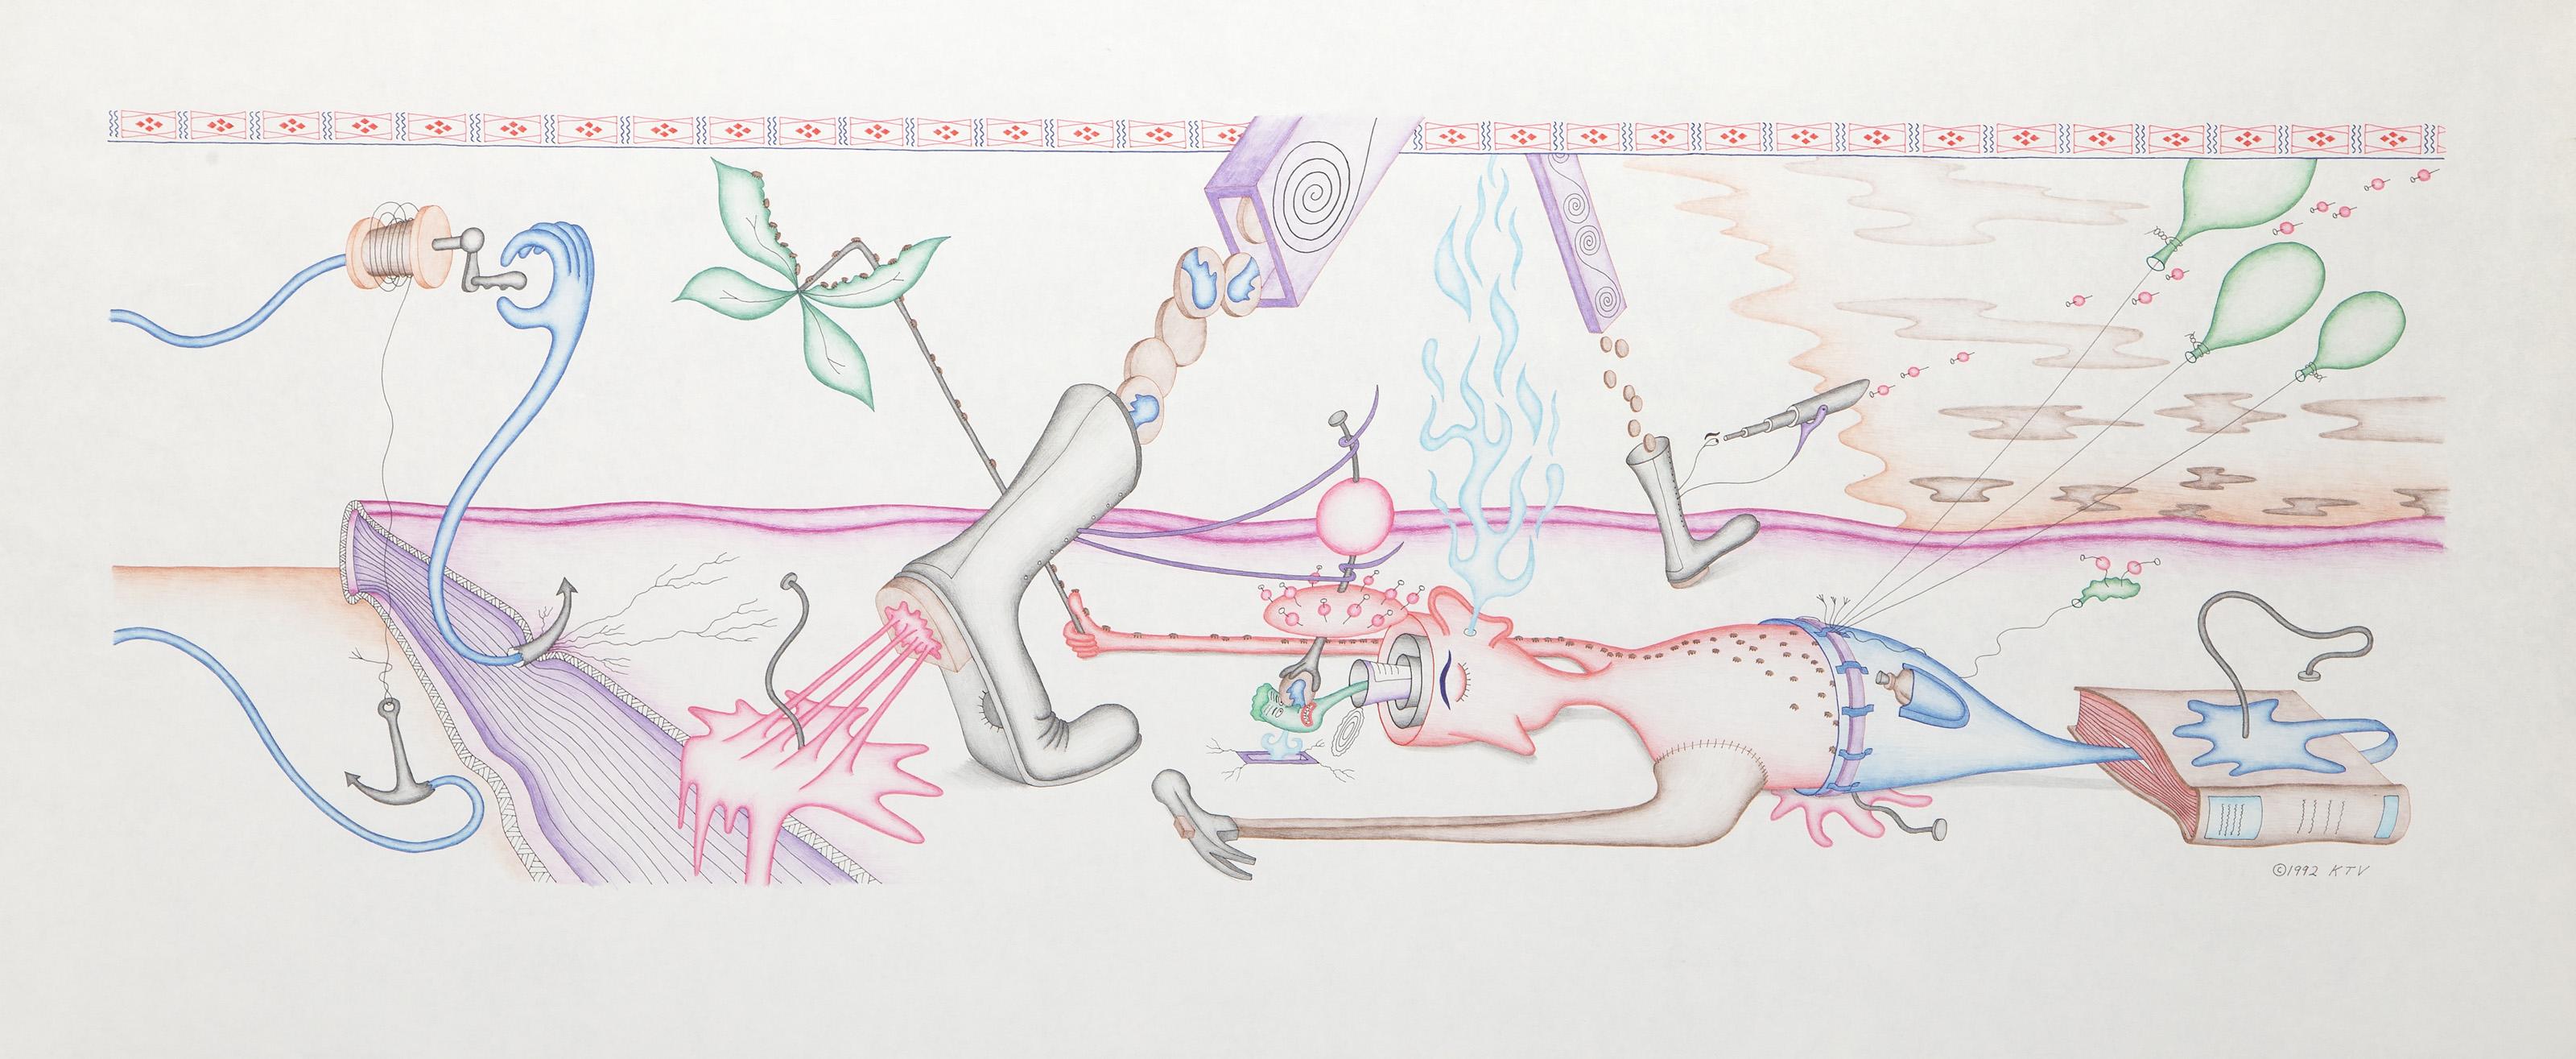 Kevin Varner, American (1954 - 2019) -  The Inner Child at the Edge of Extinction. Year: 1992, Medium: Color Pencil and Ink on Paper, signed and dated lower left, Size: 18 x 40.25 in. (45.72 x 102.24 cm) 